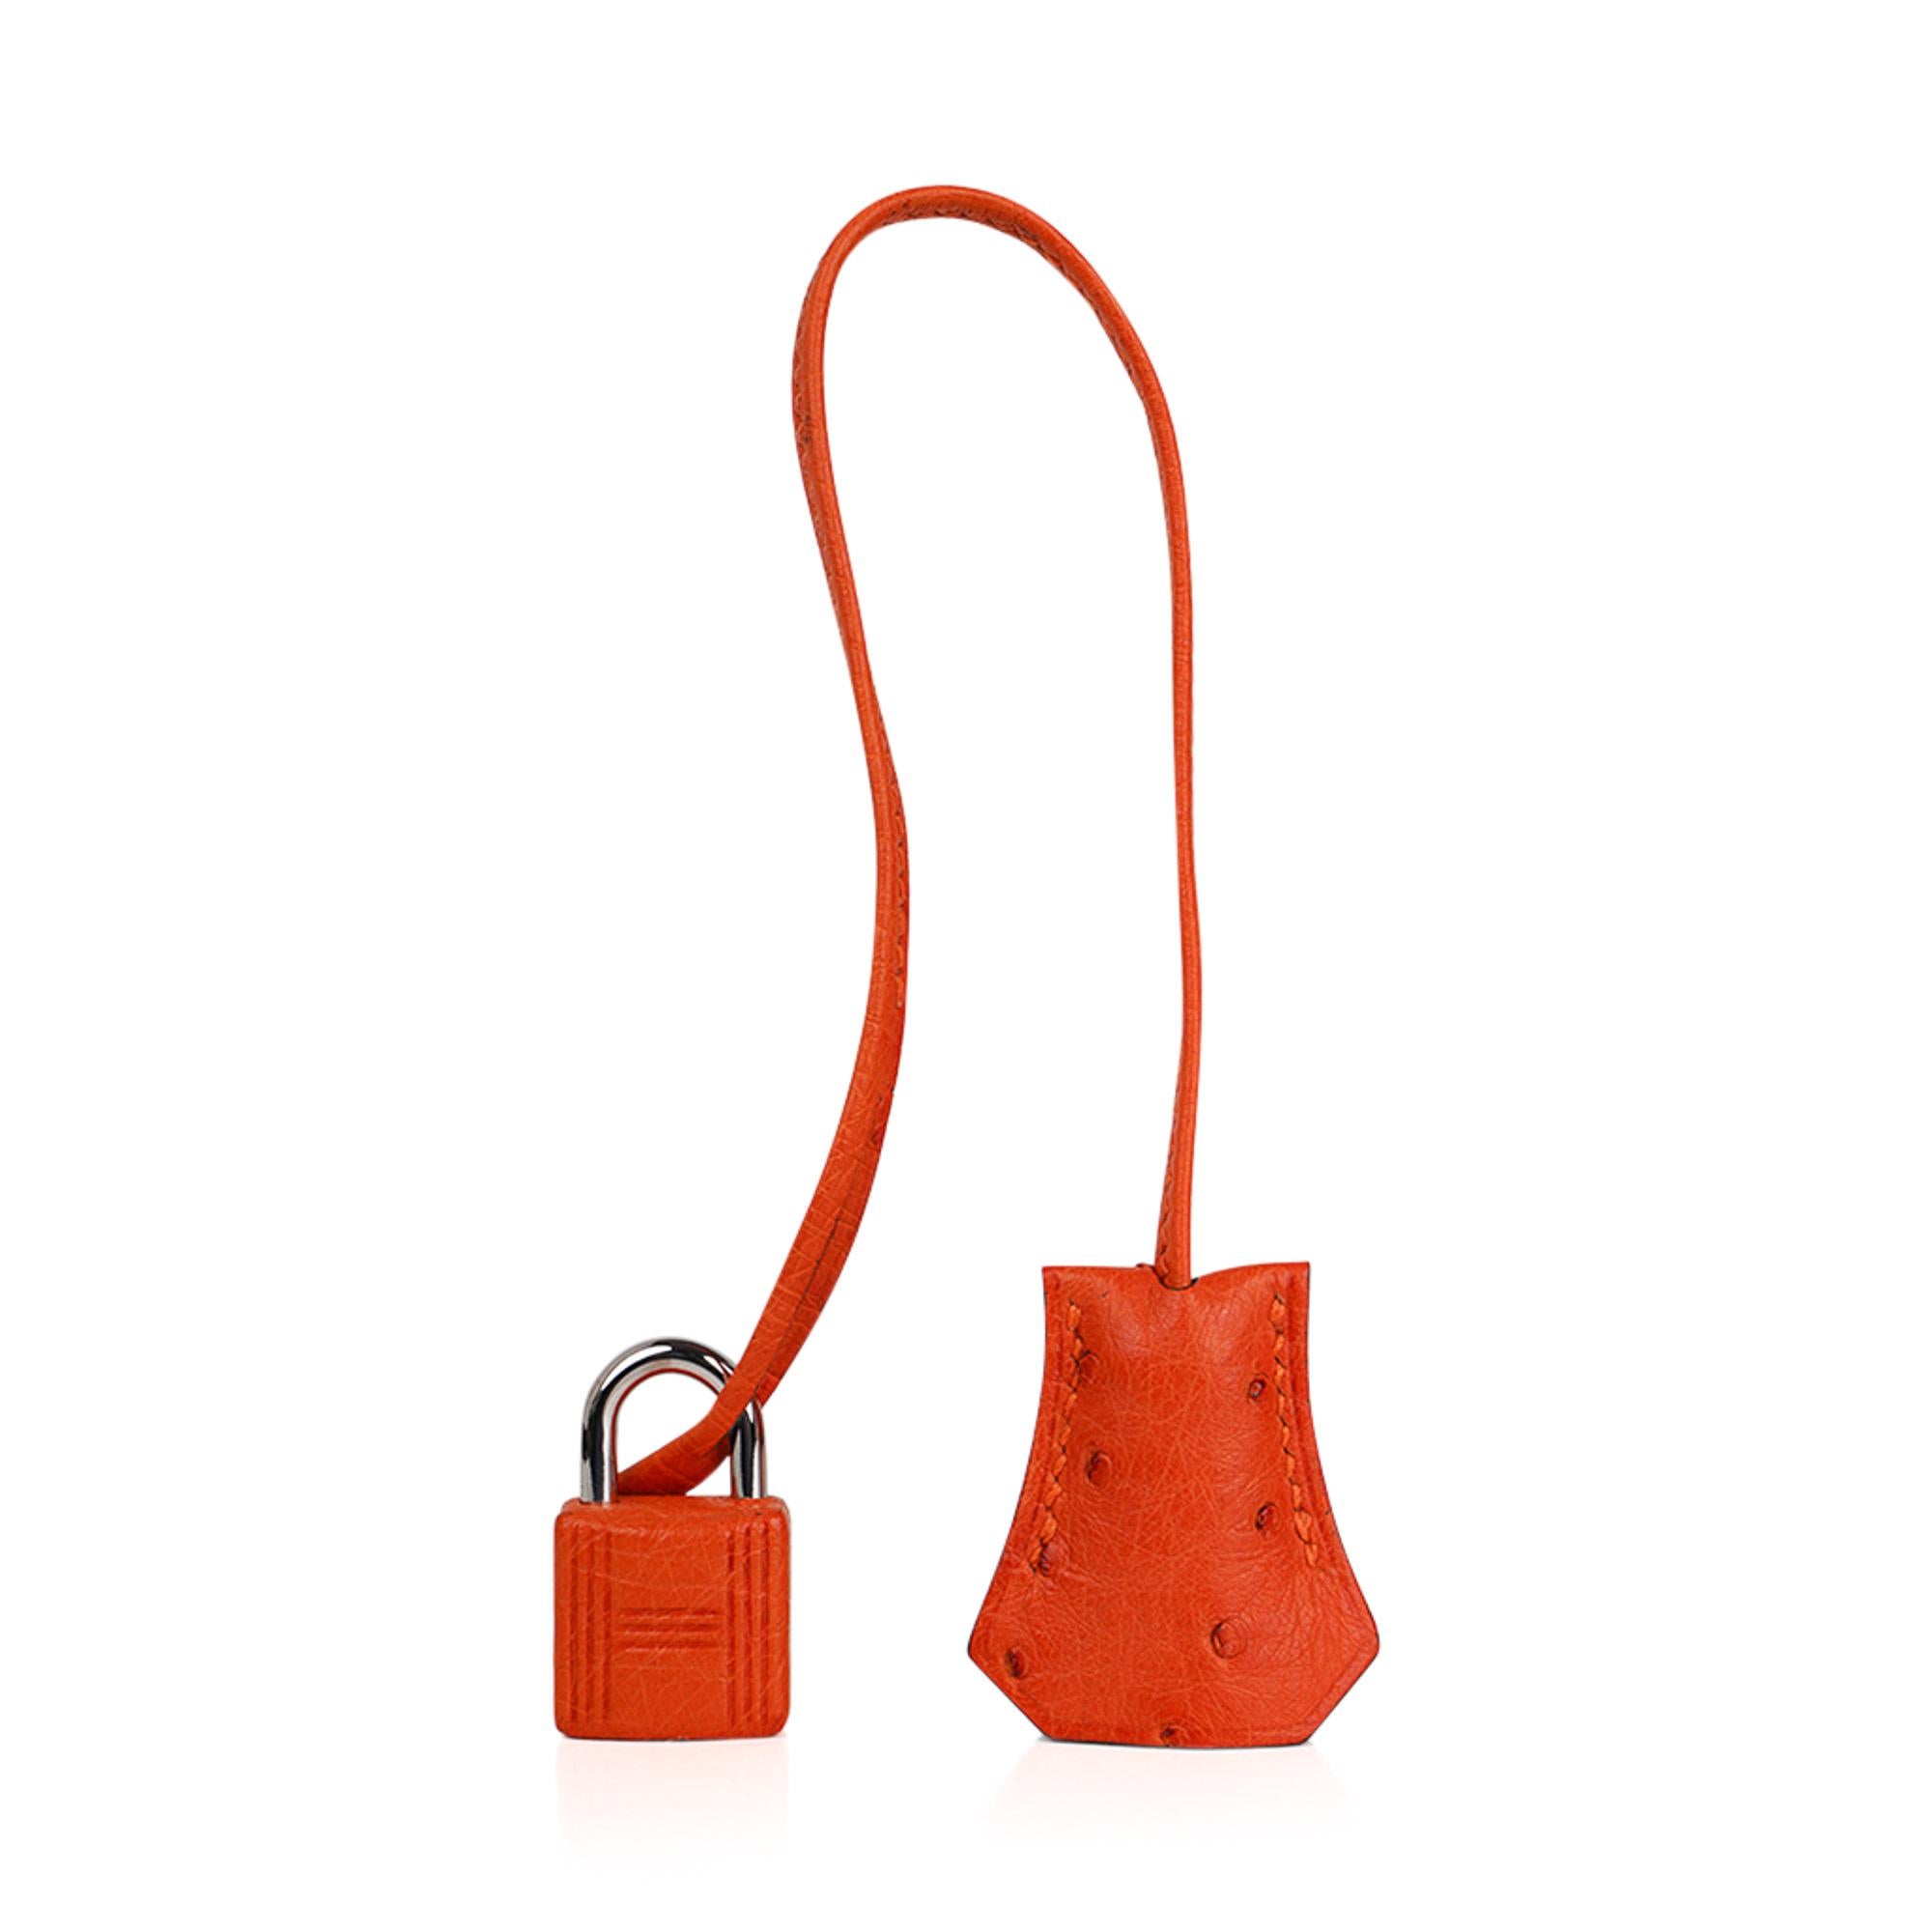 Mightychic offers a guaranteed authentic Hermes Birkin 35 bag featured in Tangerine Ostrich.
This beautiful and wearable color is a rare find.
This Hermes Birkin is lush with Palladium hardware.
Comes with lock, keys, clochette, and sleeper.
Like